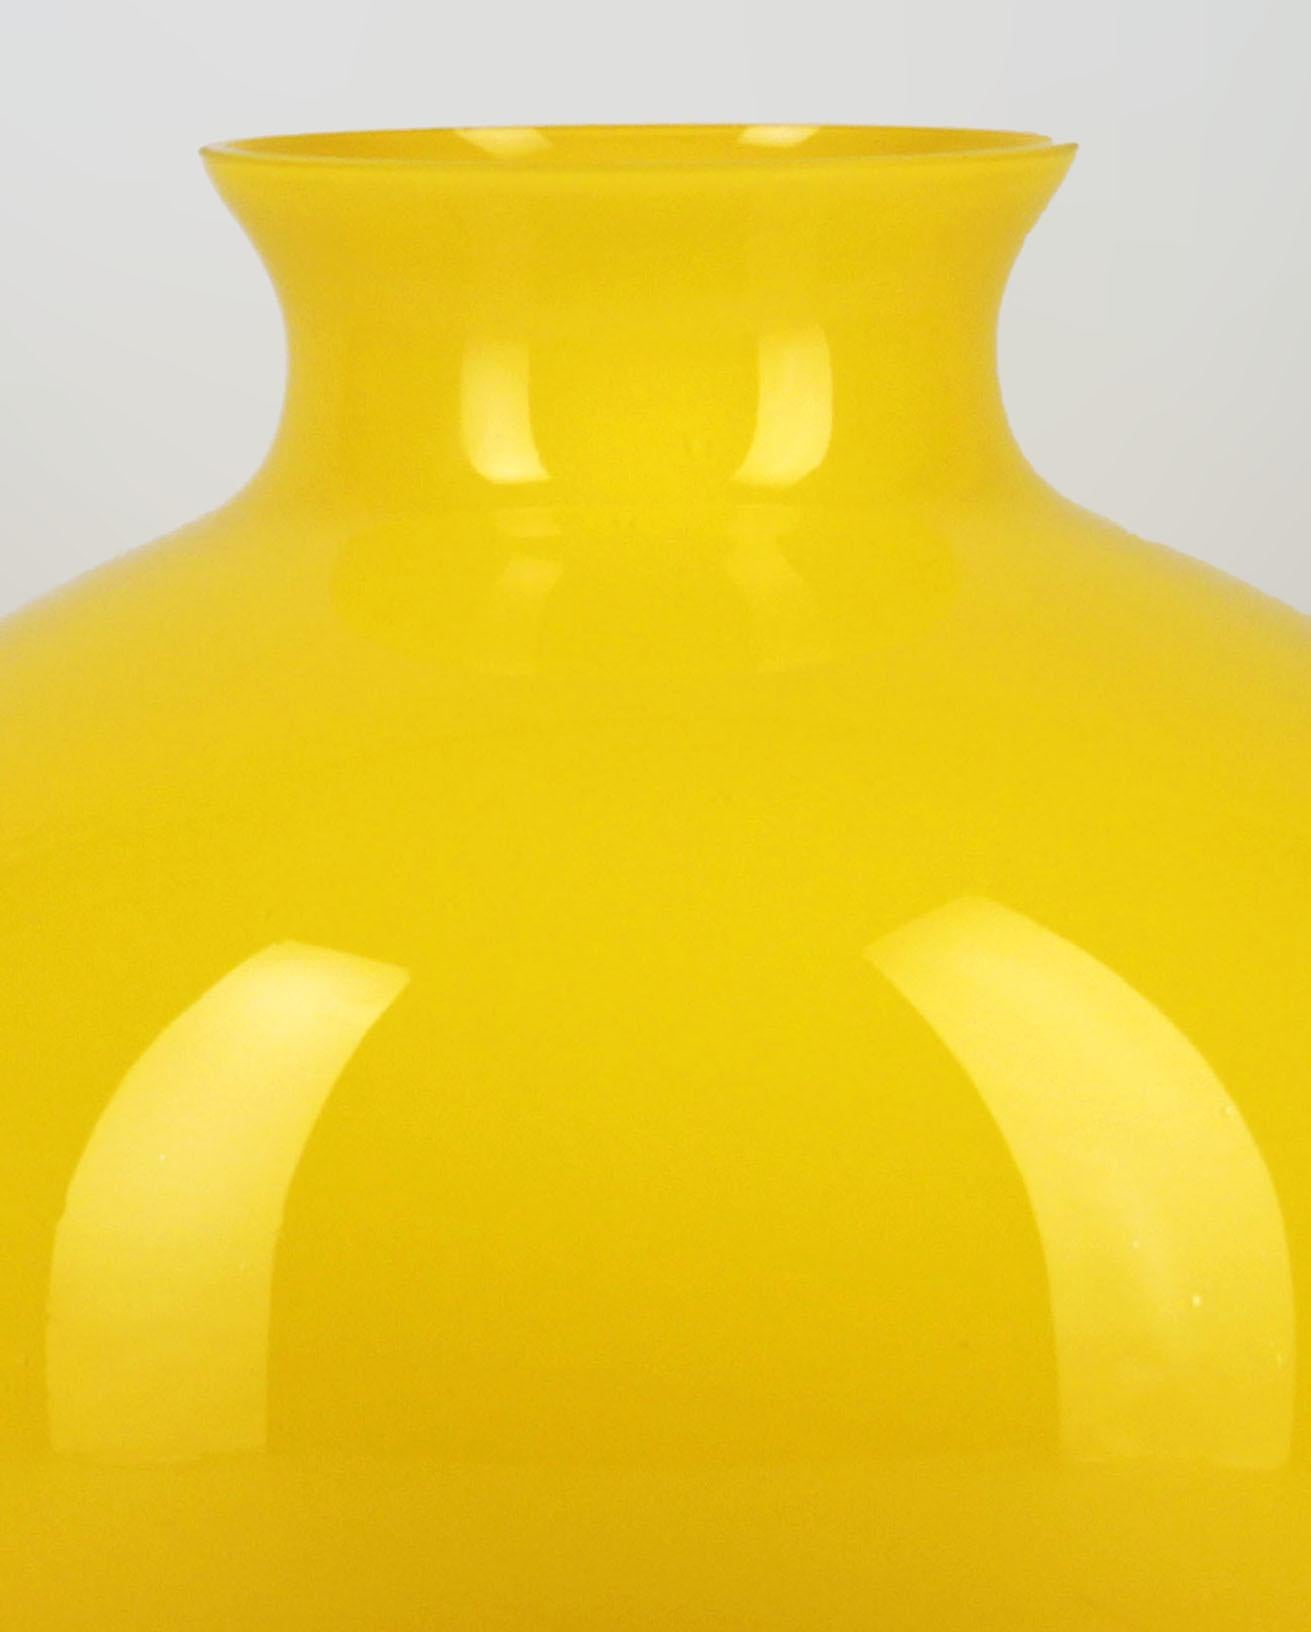 Space Age Late 20th Century Bulbous Polished Glass Yellow Vase of Scandinavian Design For Sale